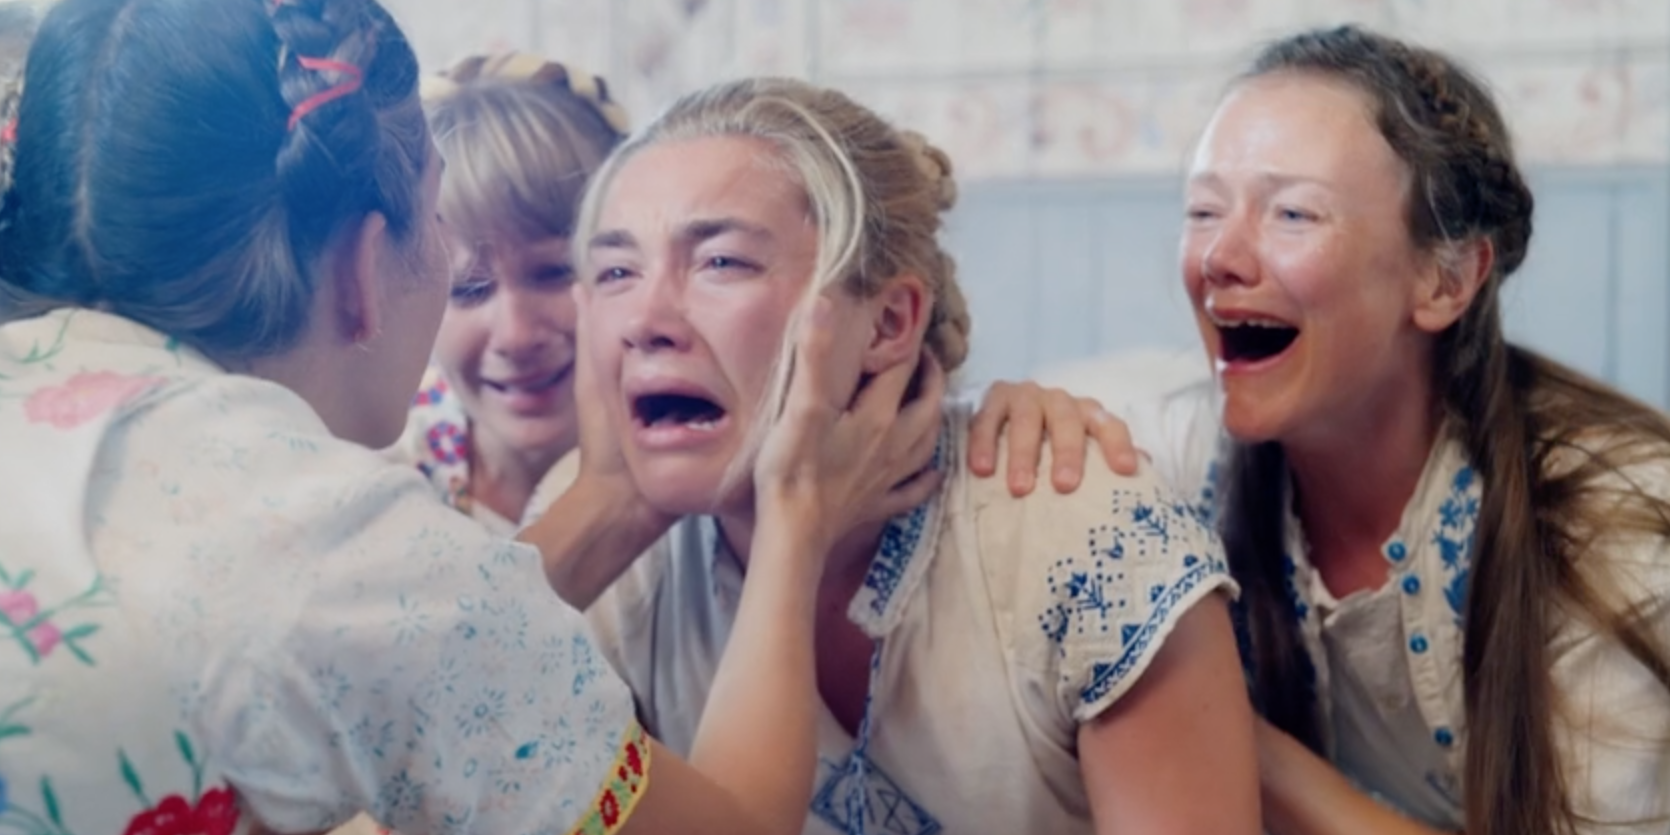 Scary scene of Dani crying with other commune women in Midsommar